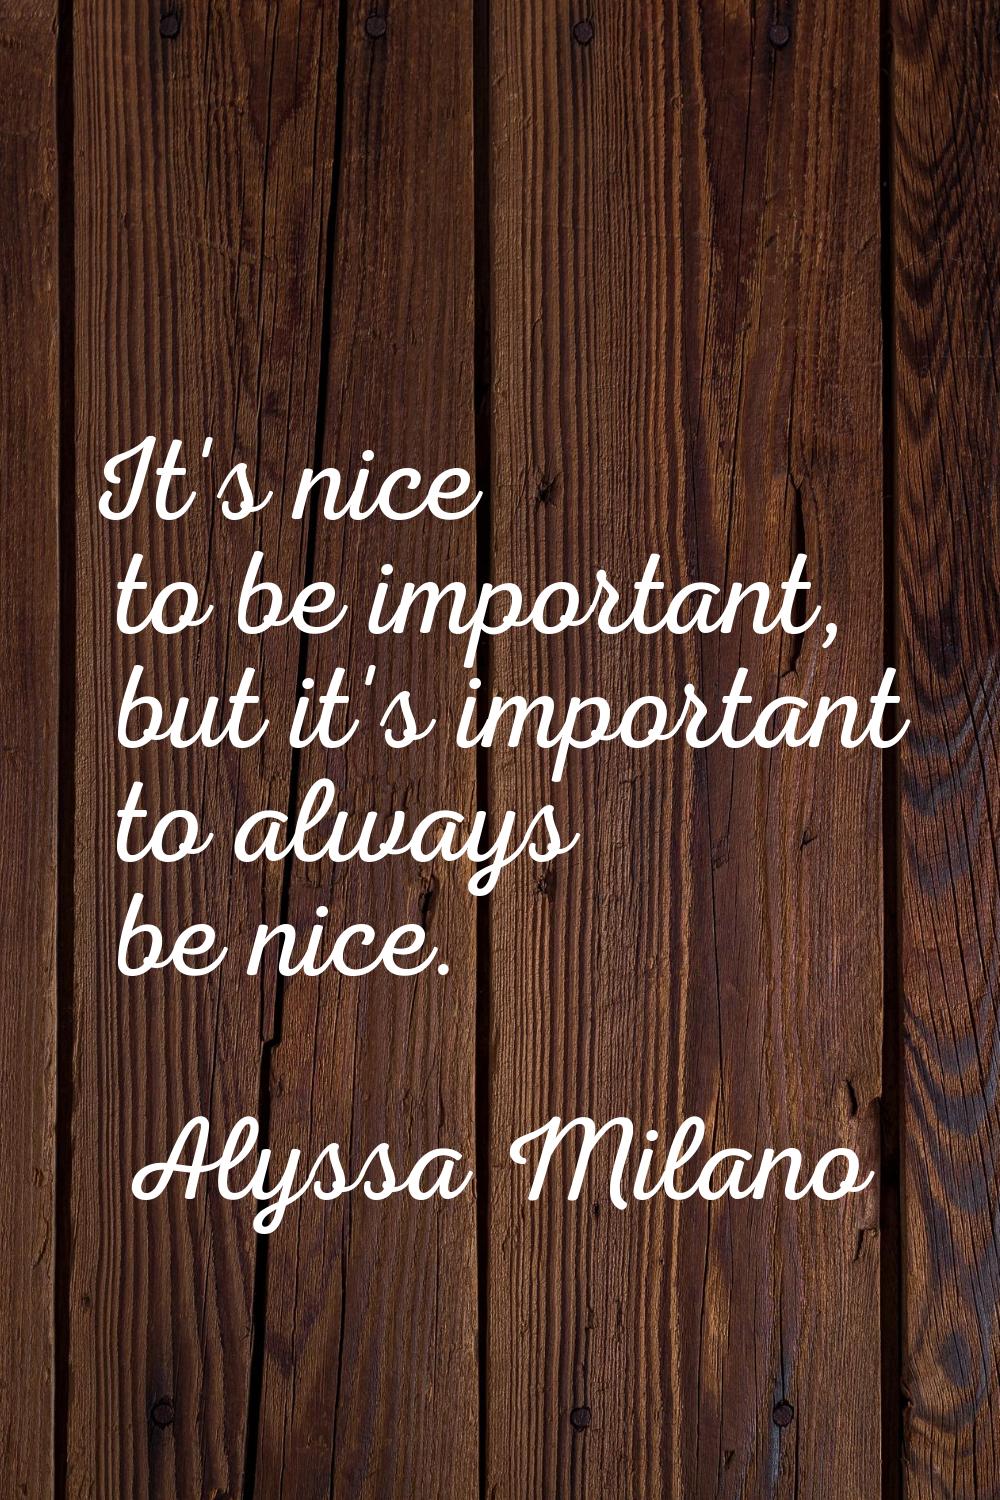 It's nice to be important, but it's important to always be nice.